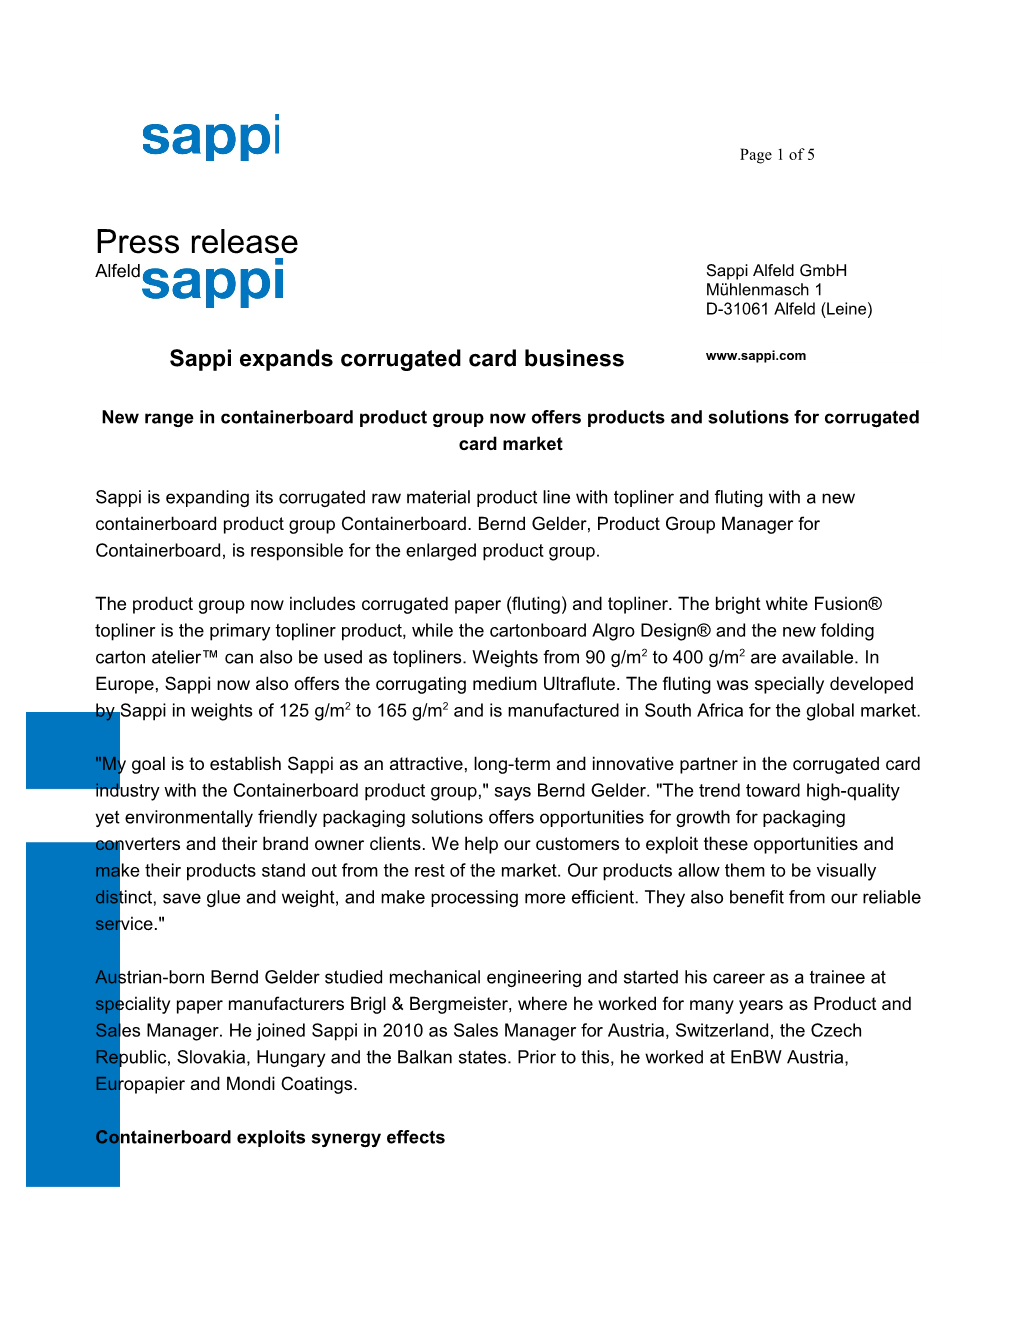 Sappi Expands Corrugated Card Business